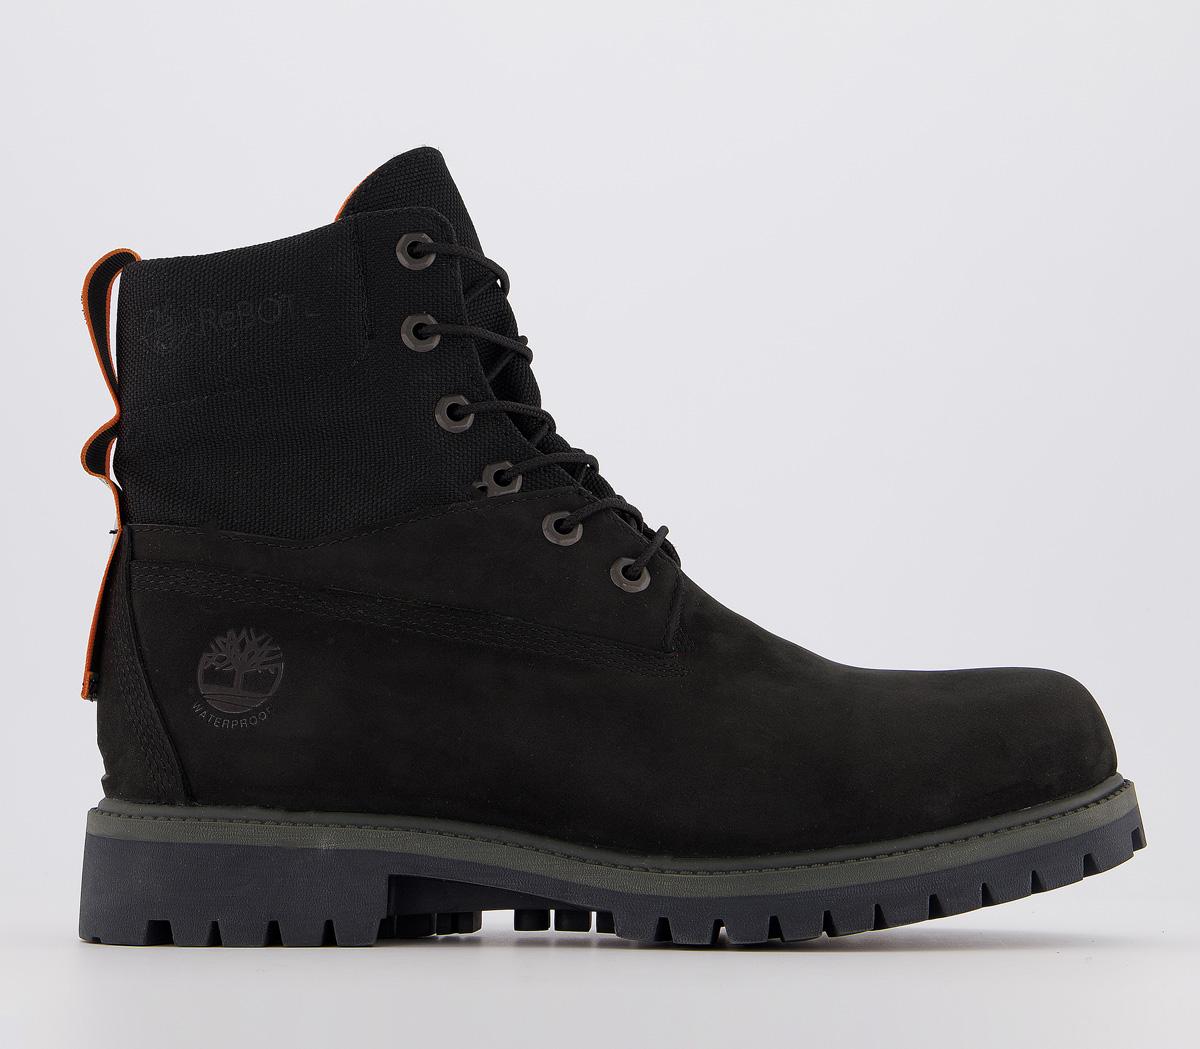 timberland casual boots